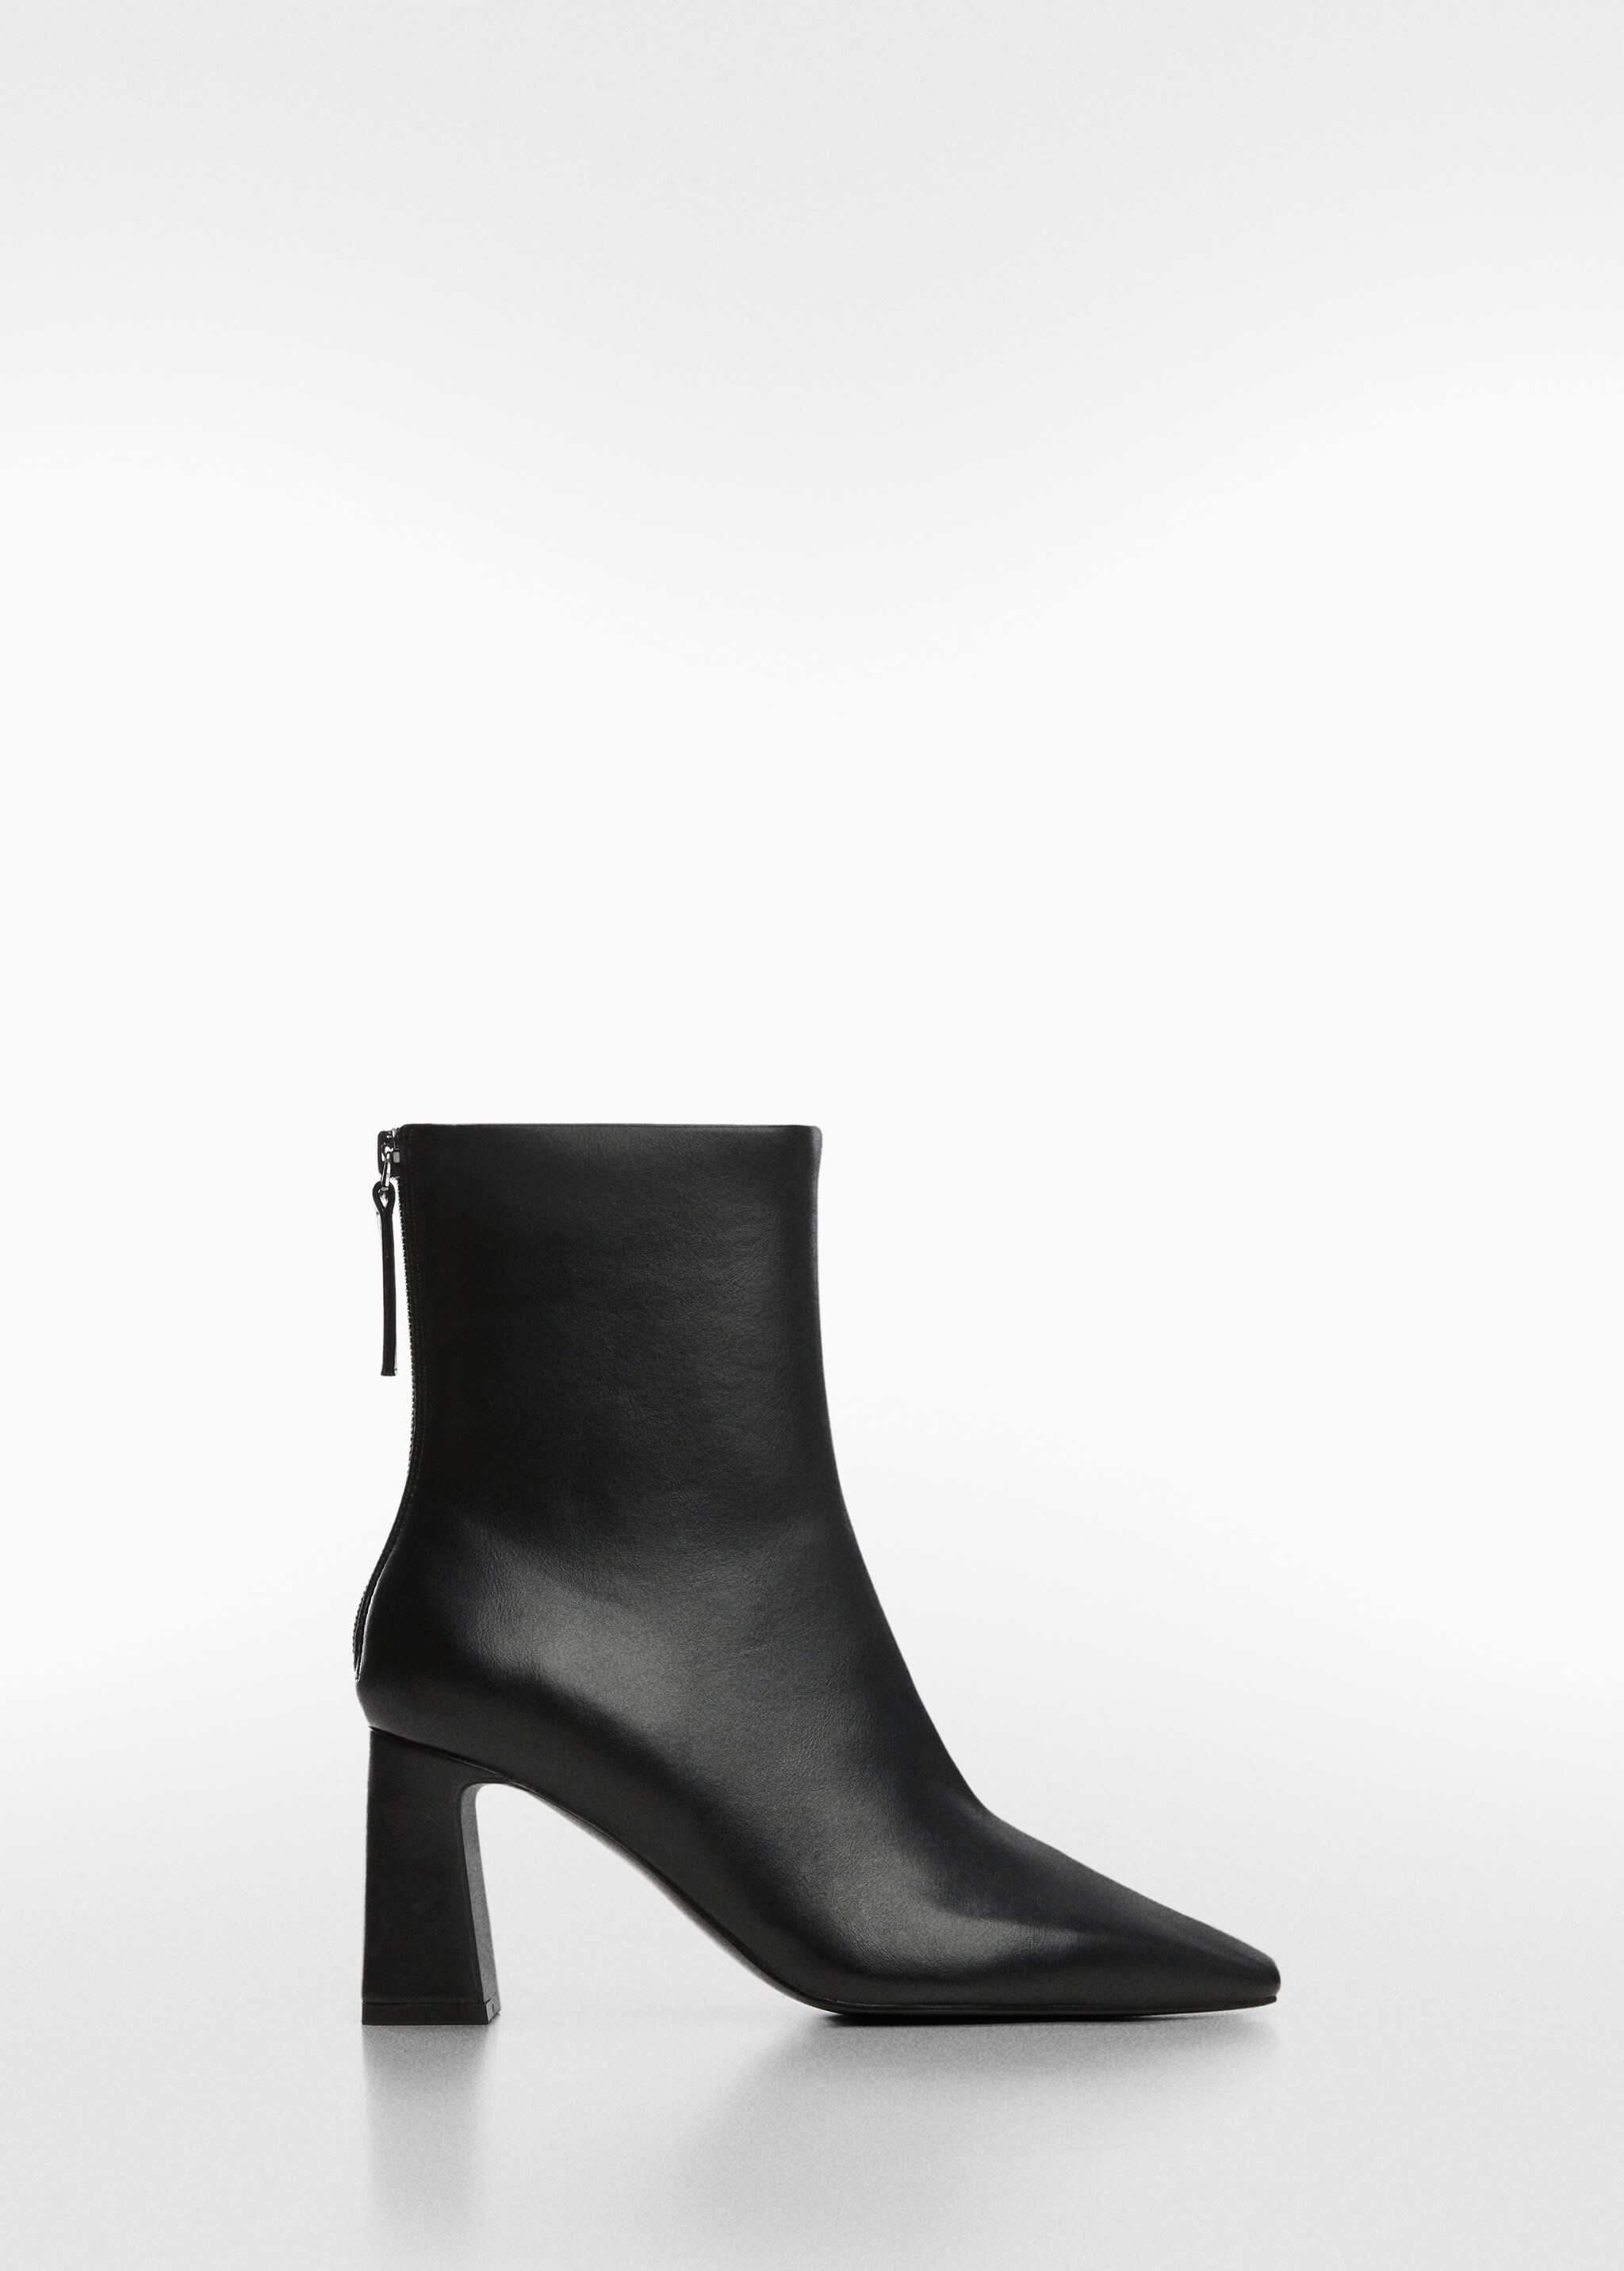 Zipper fastening bootie - Article without model